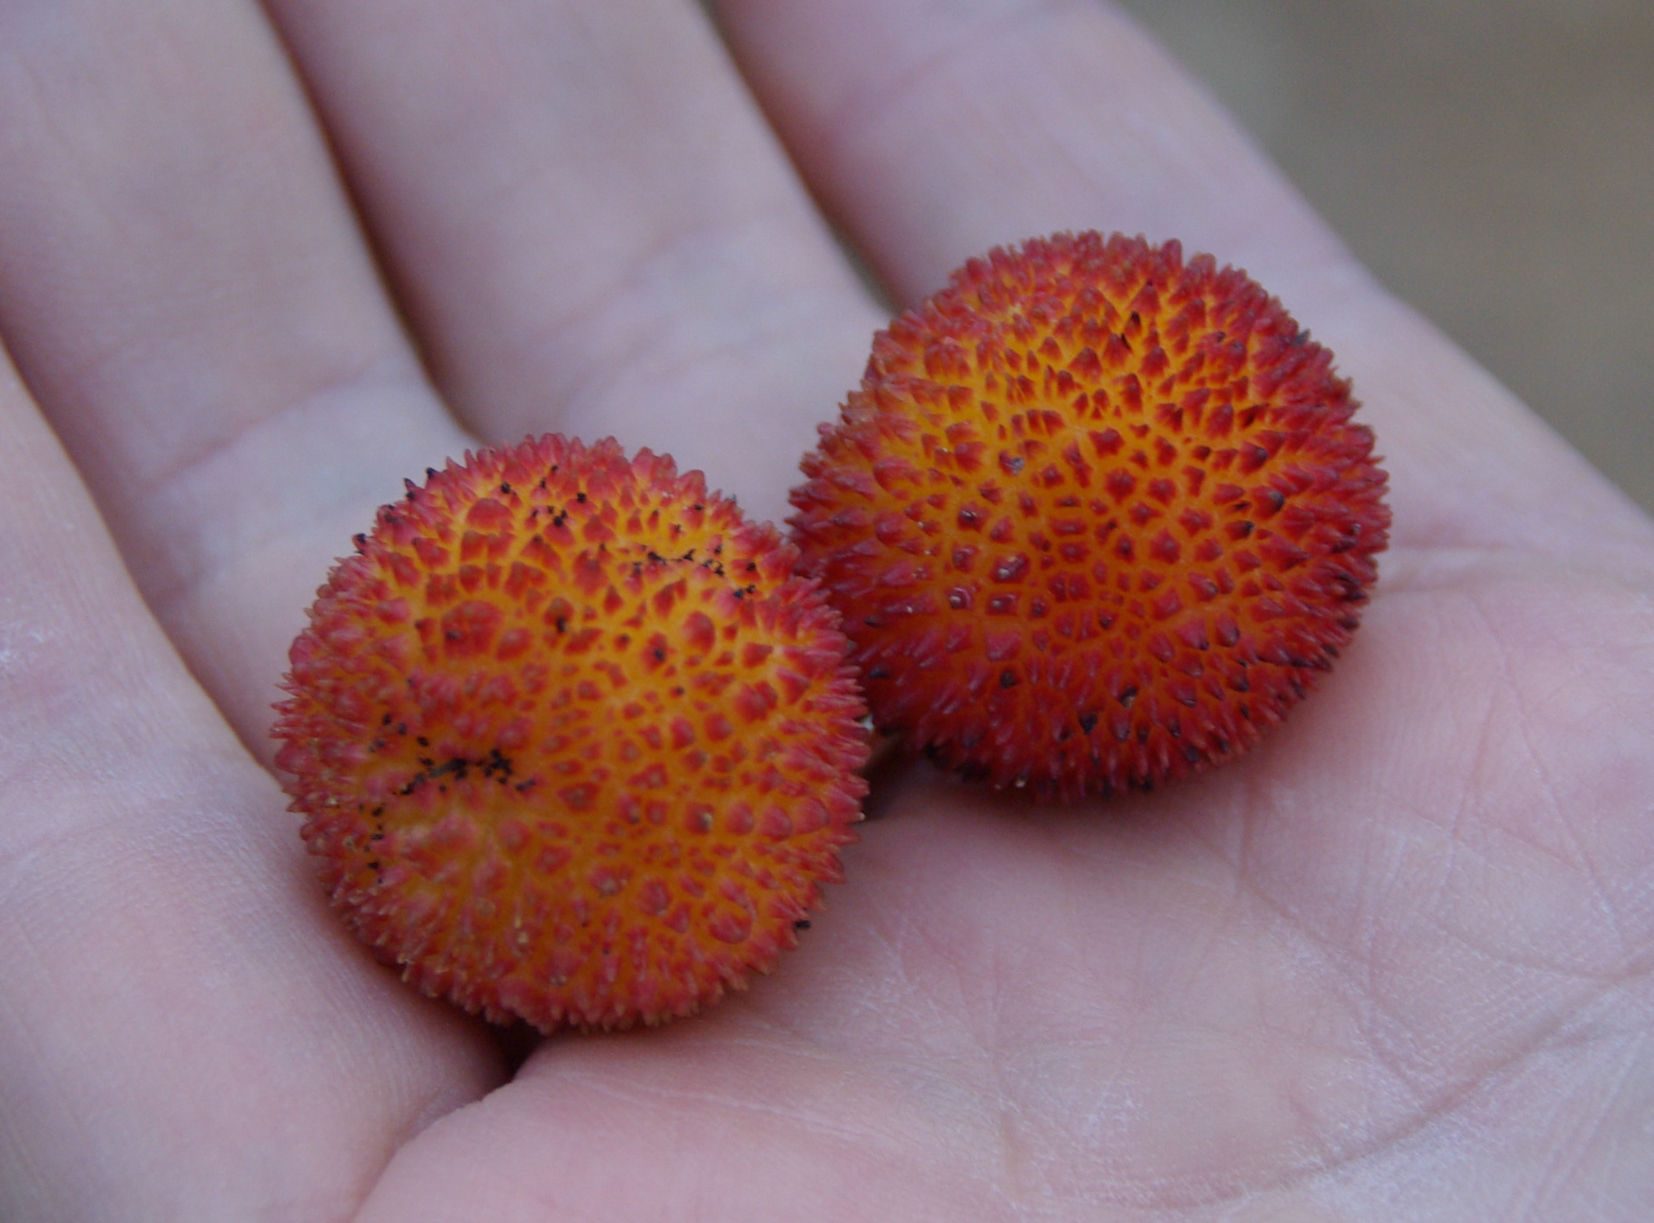 fruits from the strawberry tree